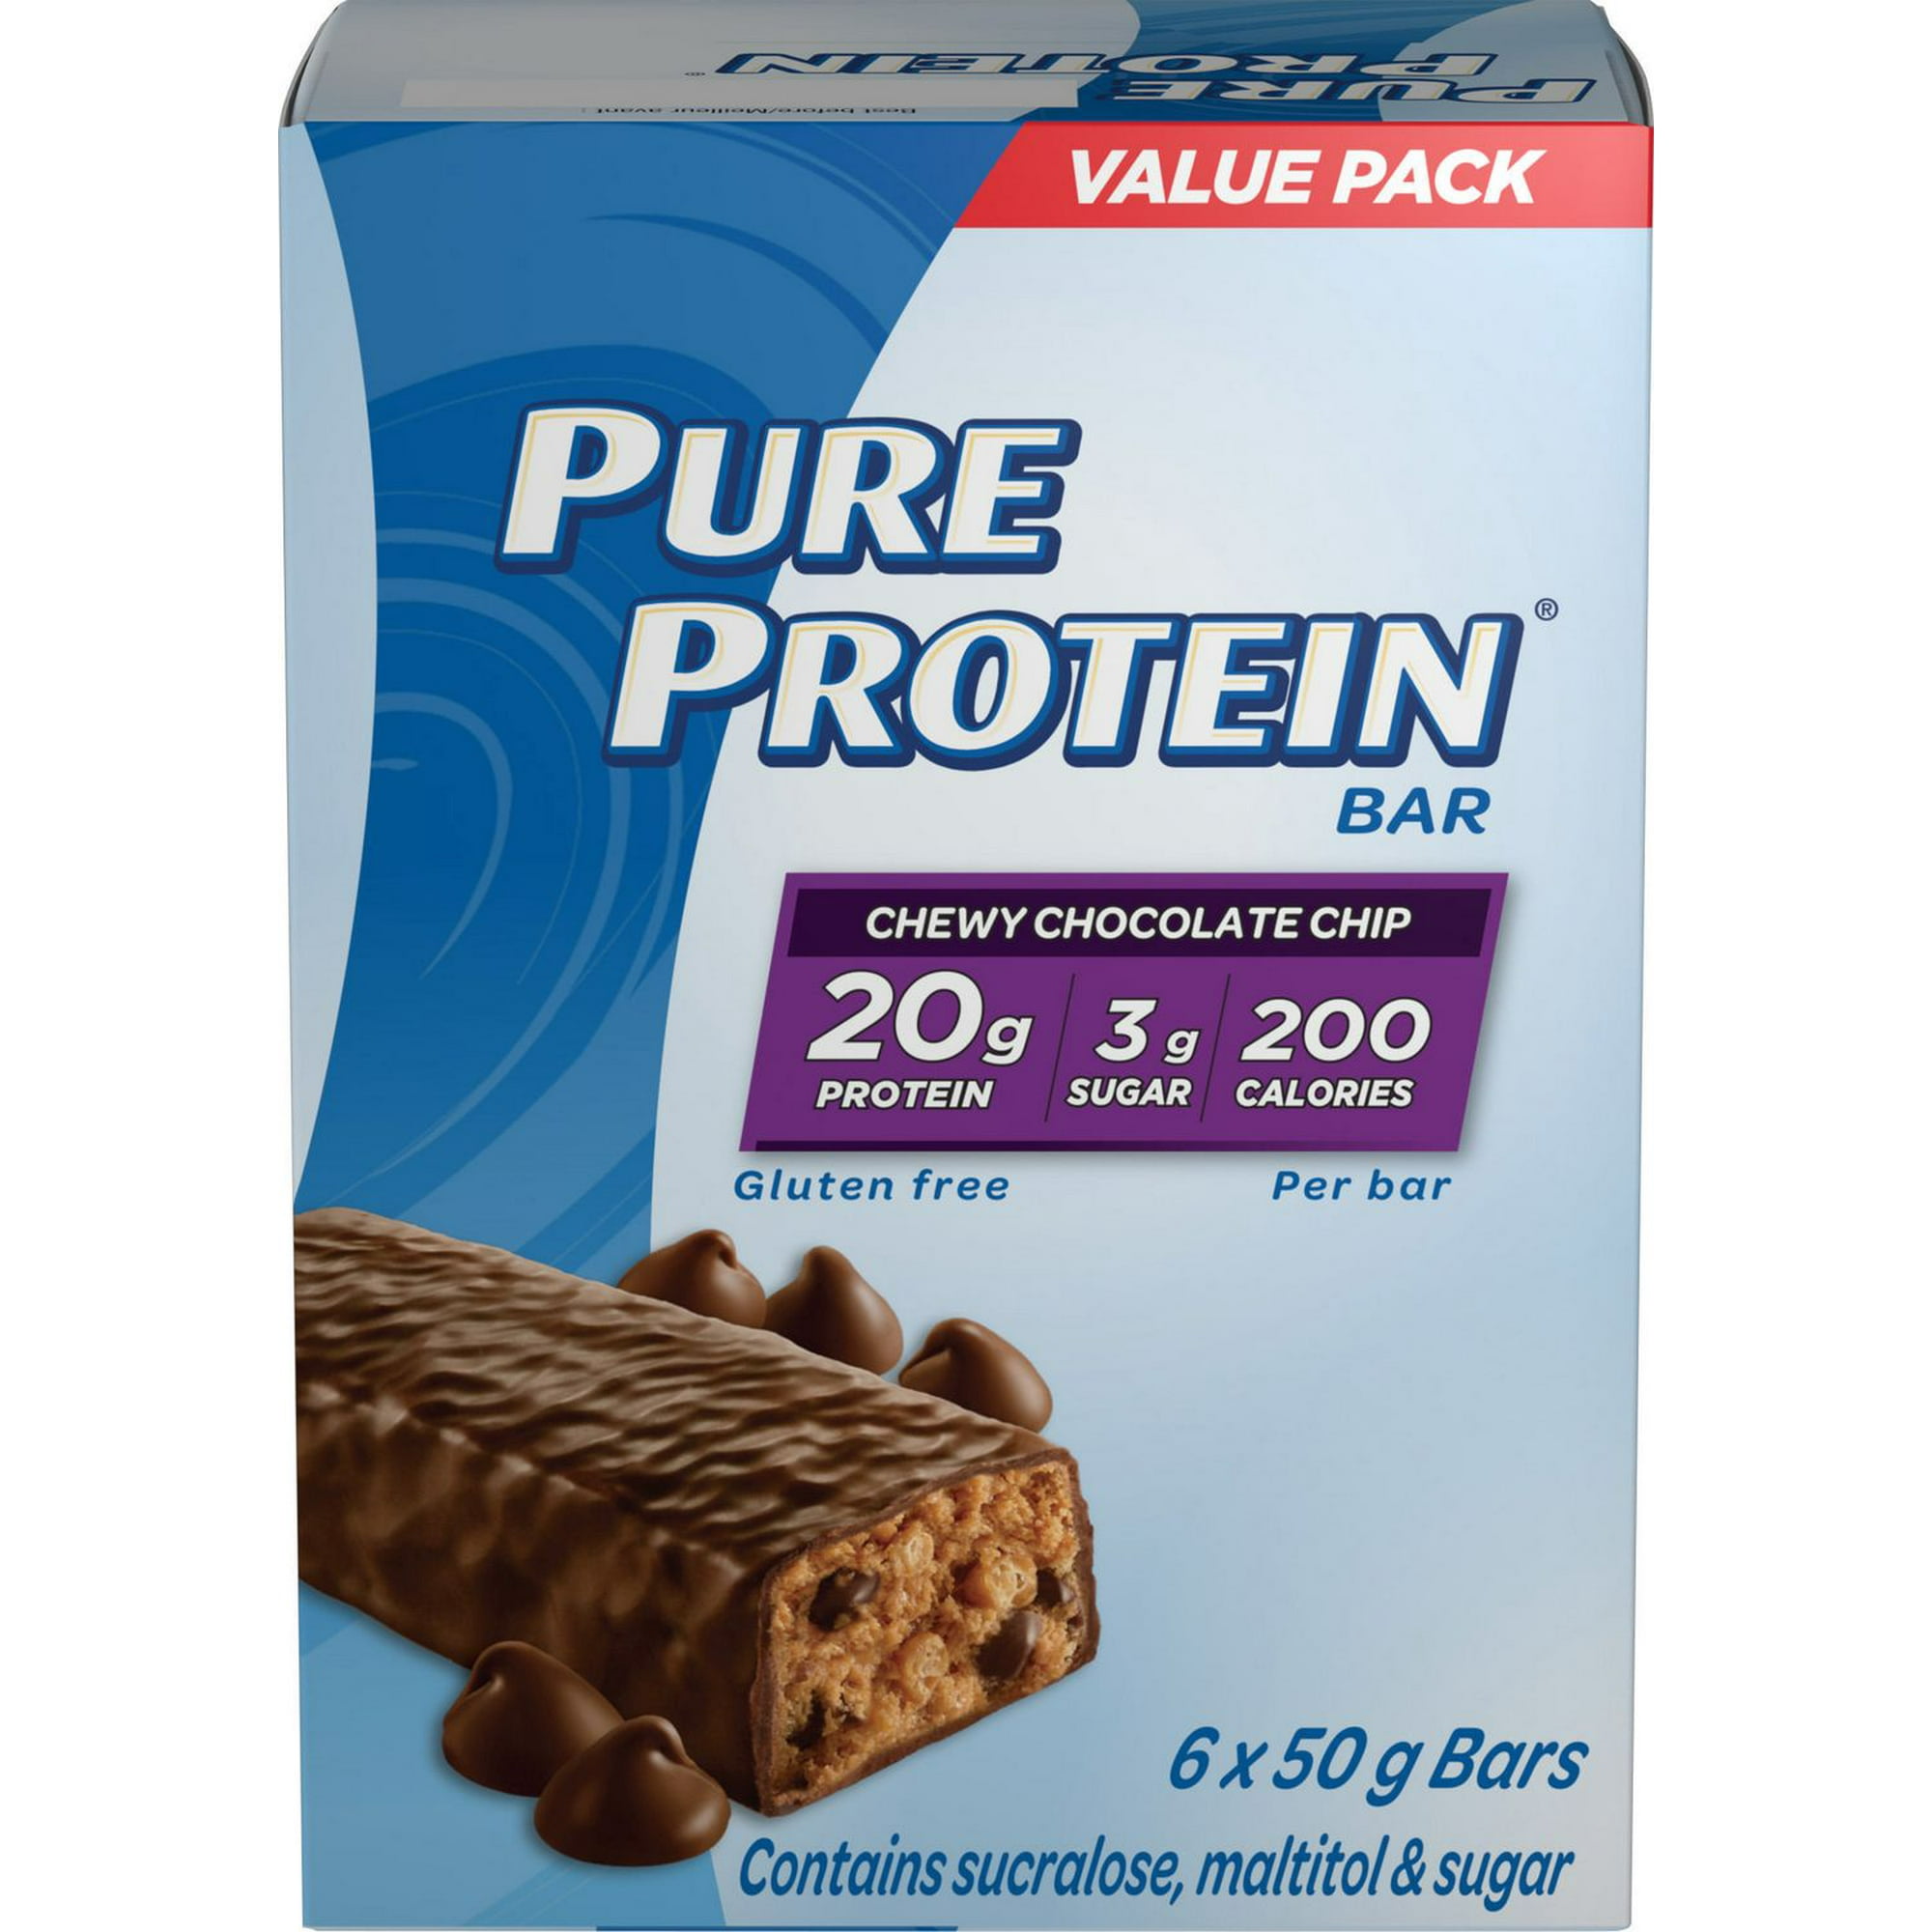 Buy Pure Protein Chewy Chocolate Chip Protein Bar at